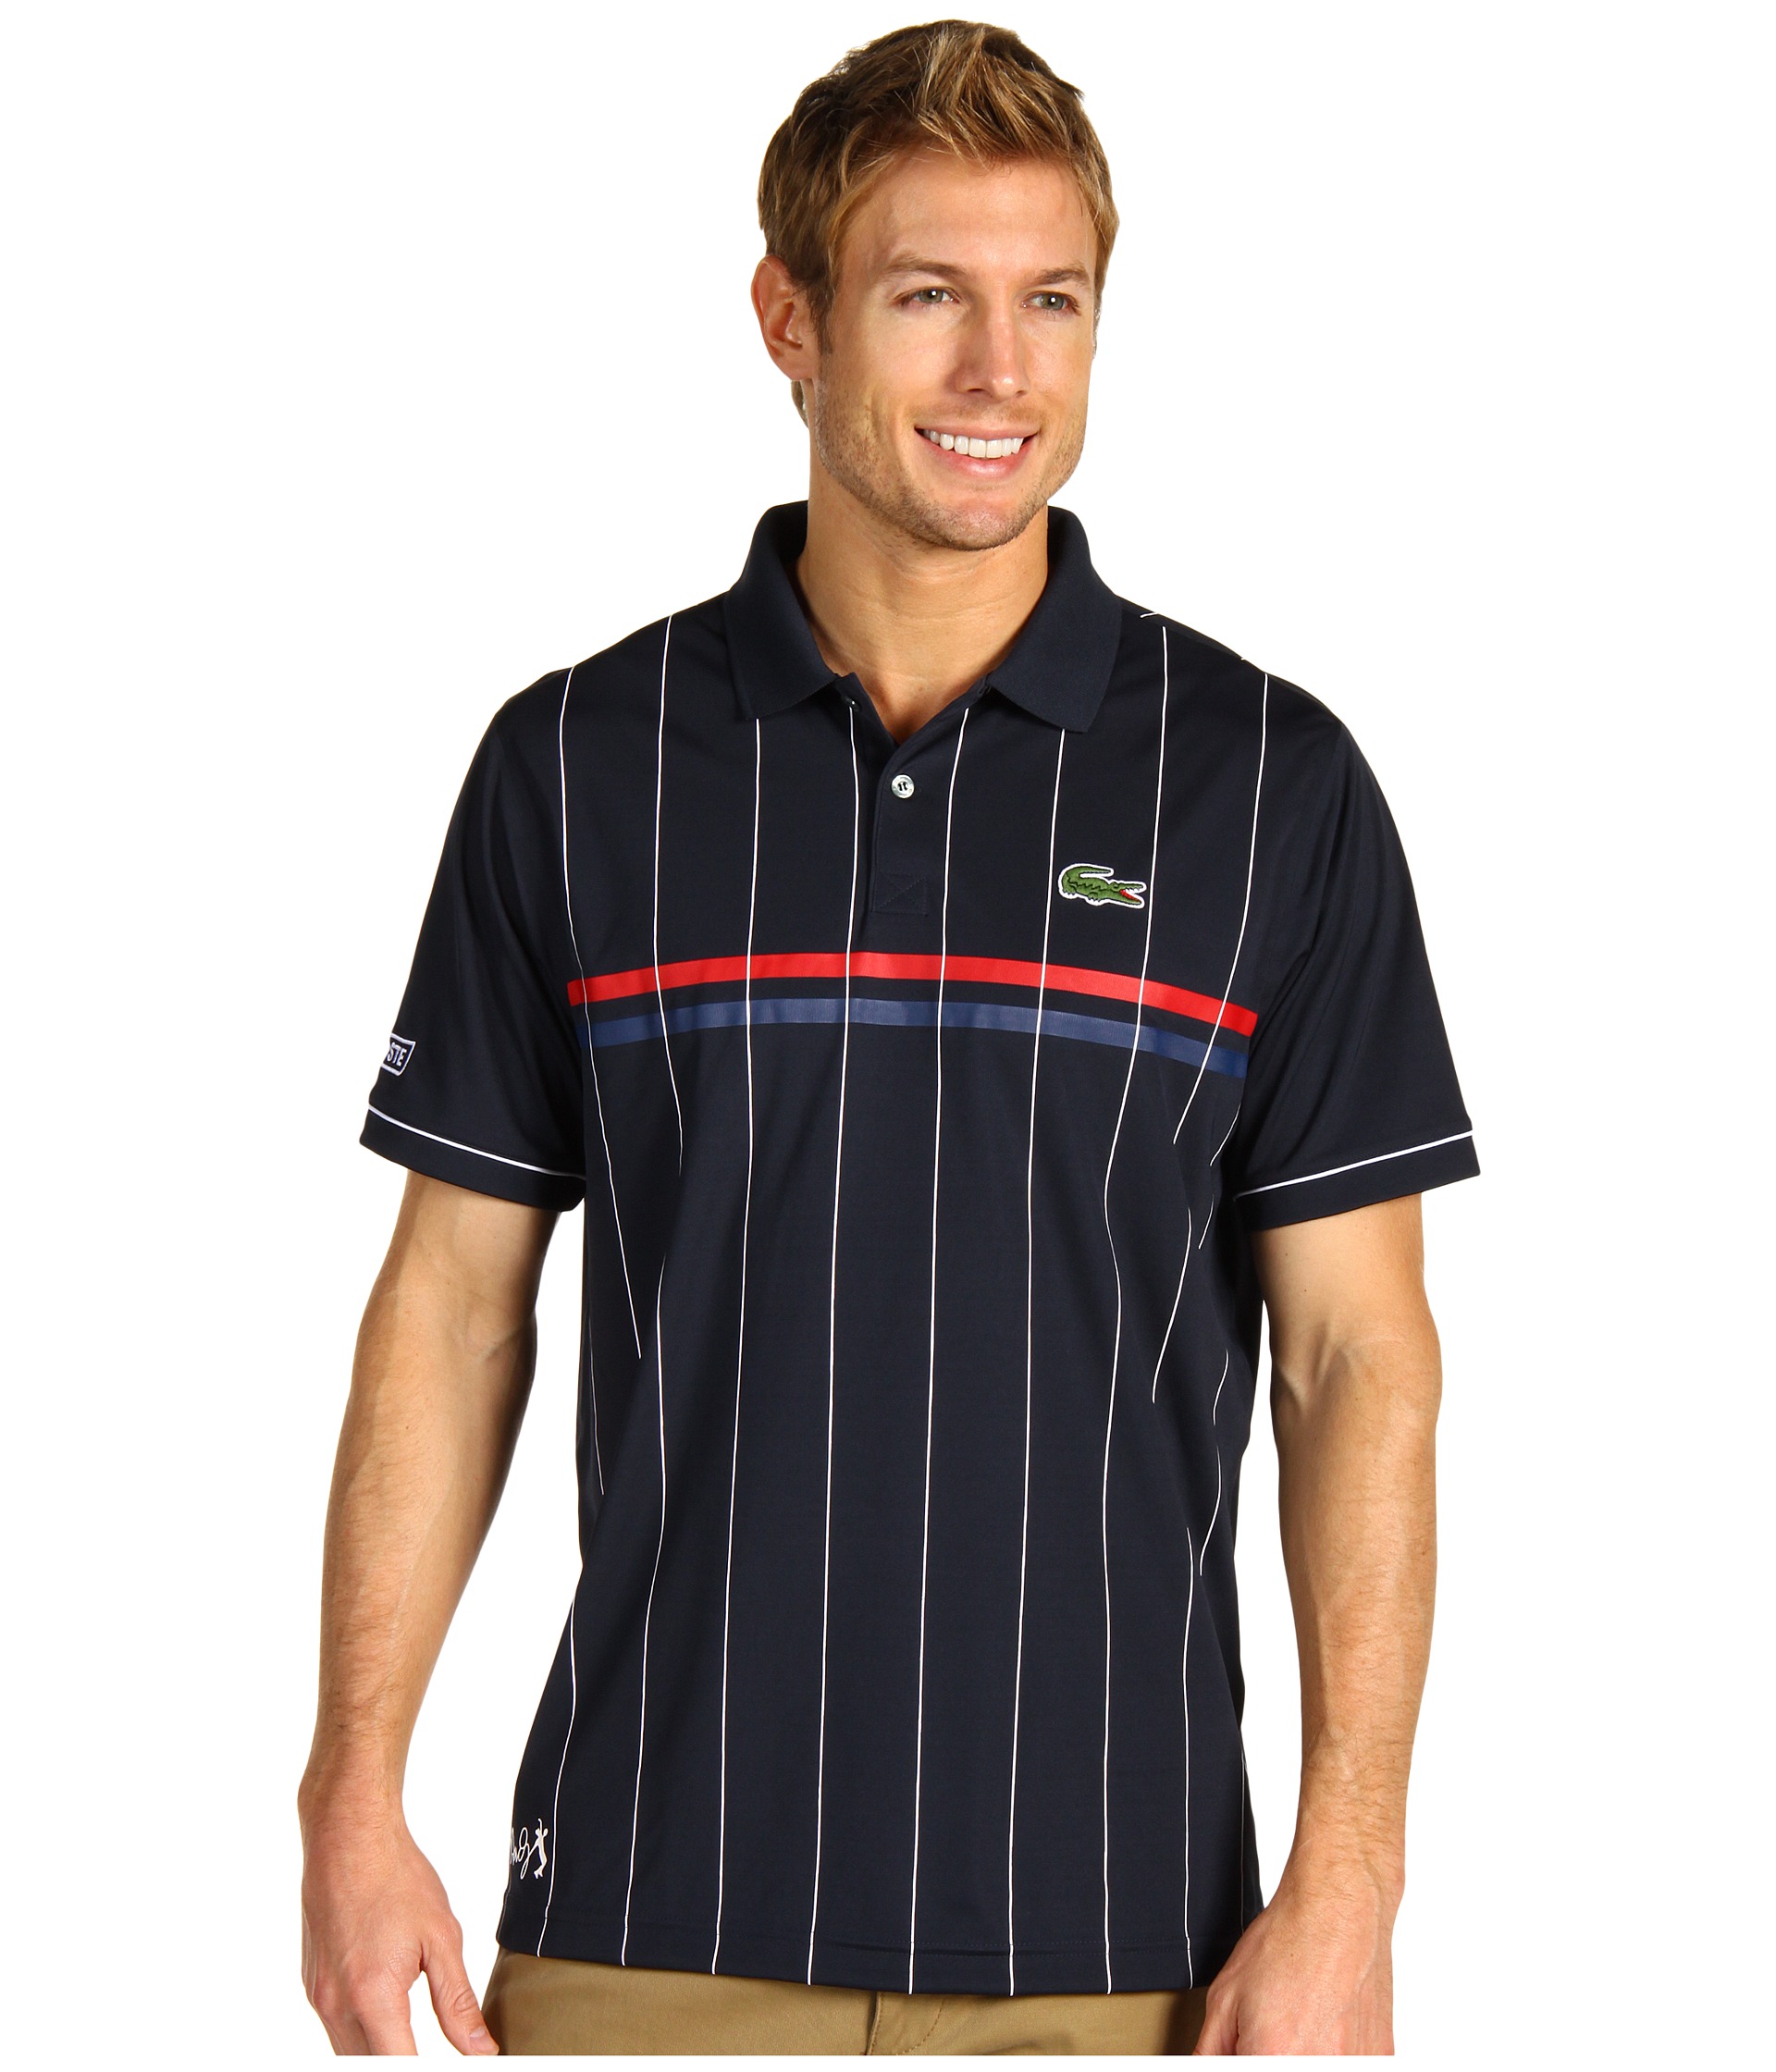 Lacoste Andy Roddick S/S Super Dry Chest Stripe Polo Shirt on PopScreen